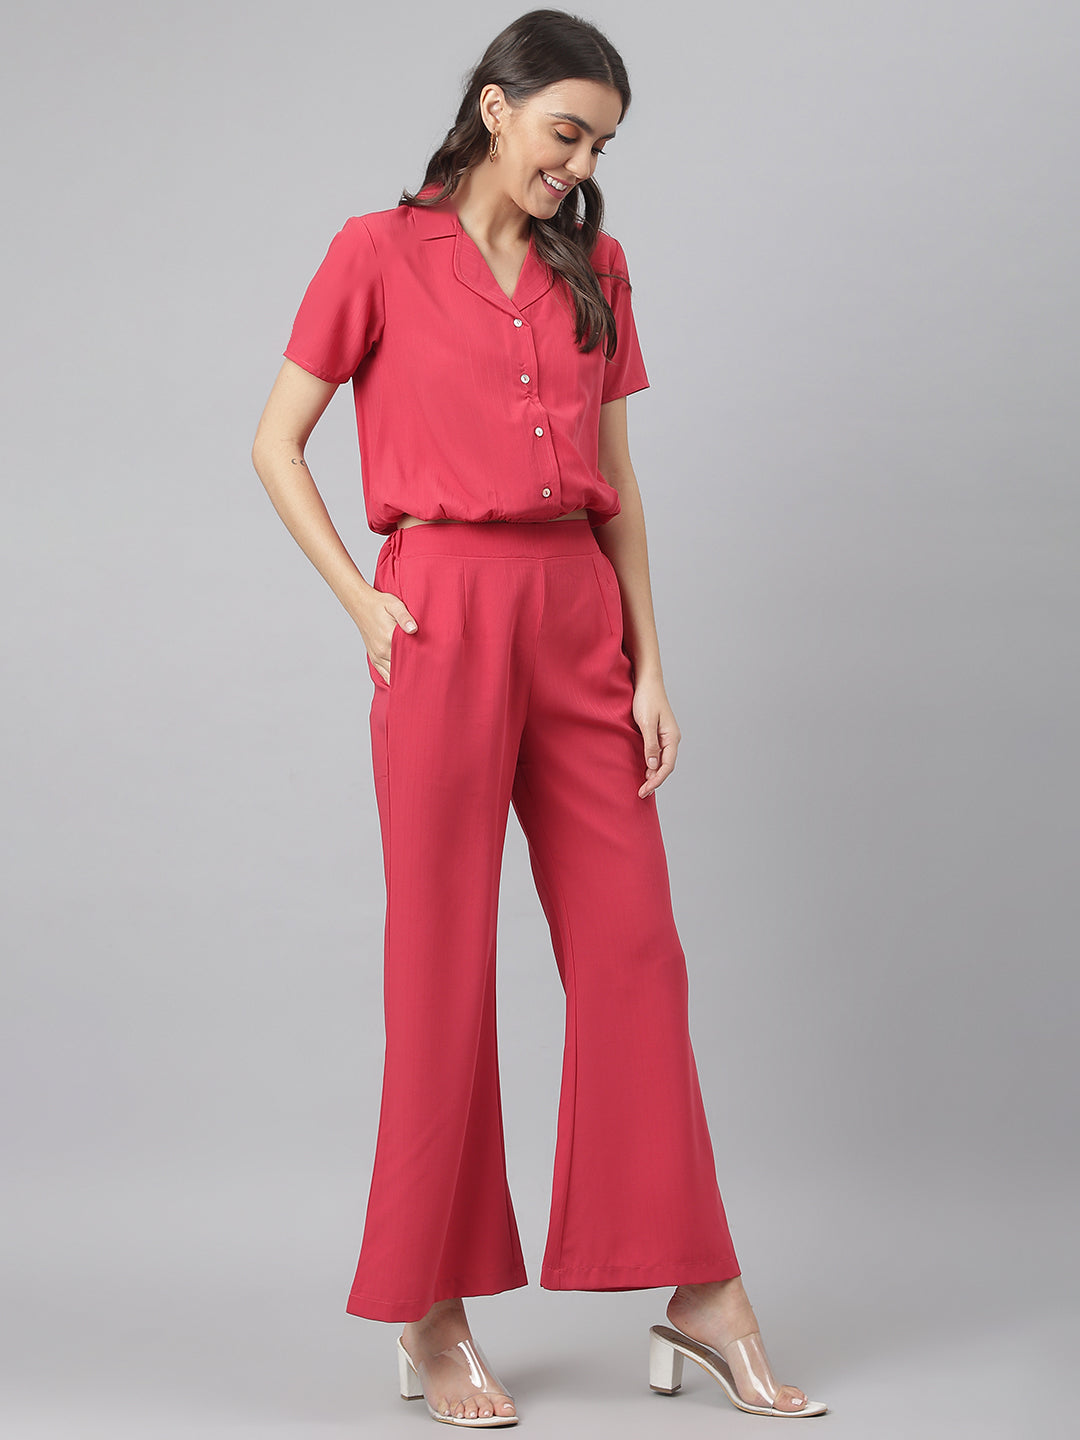 Pink V Neck Collared Co-ordinate Set With Bell Bottom